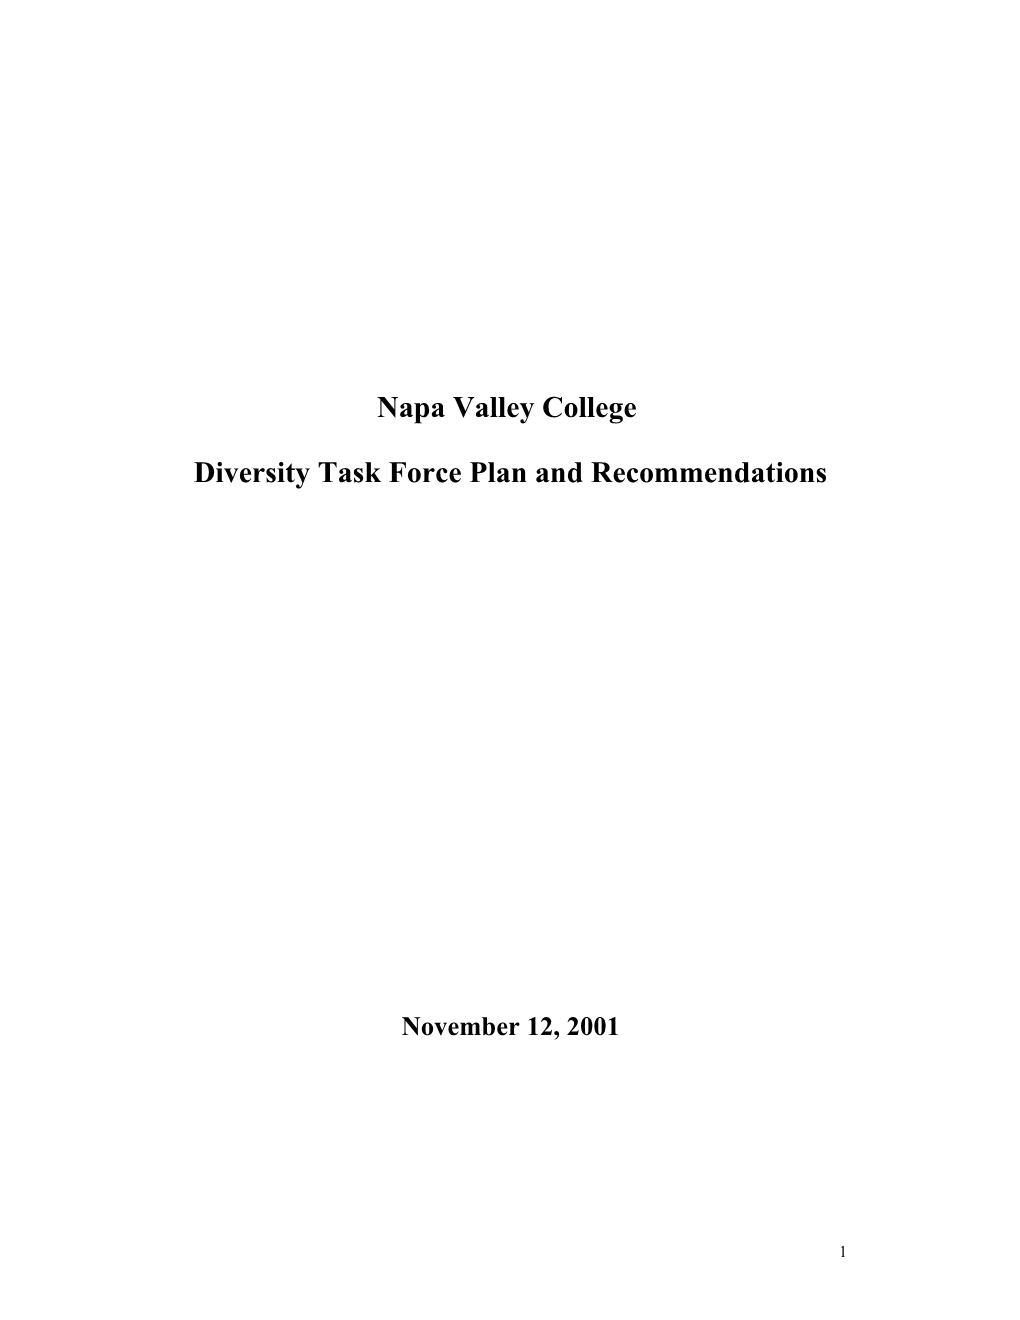 Diversity Task Force Plan and Recommendations